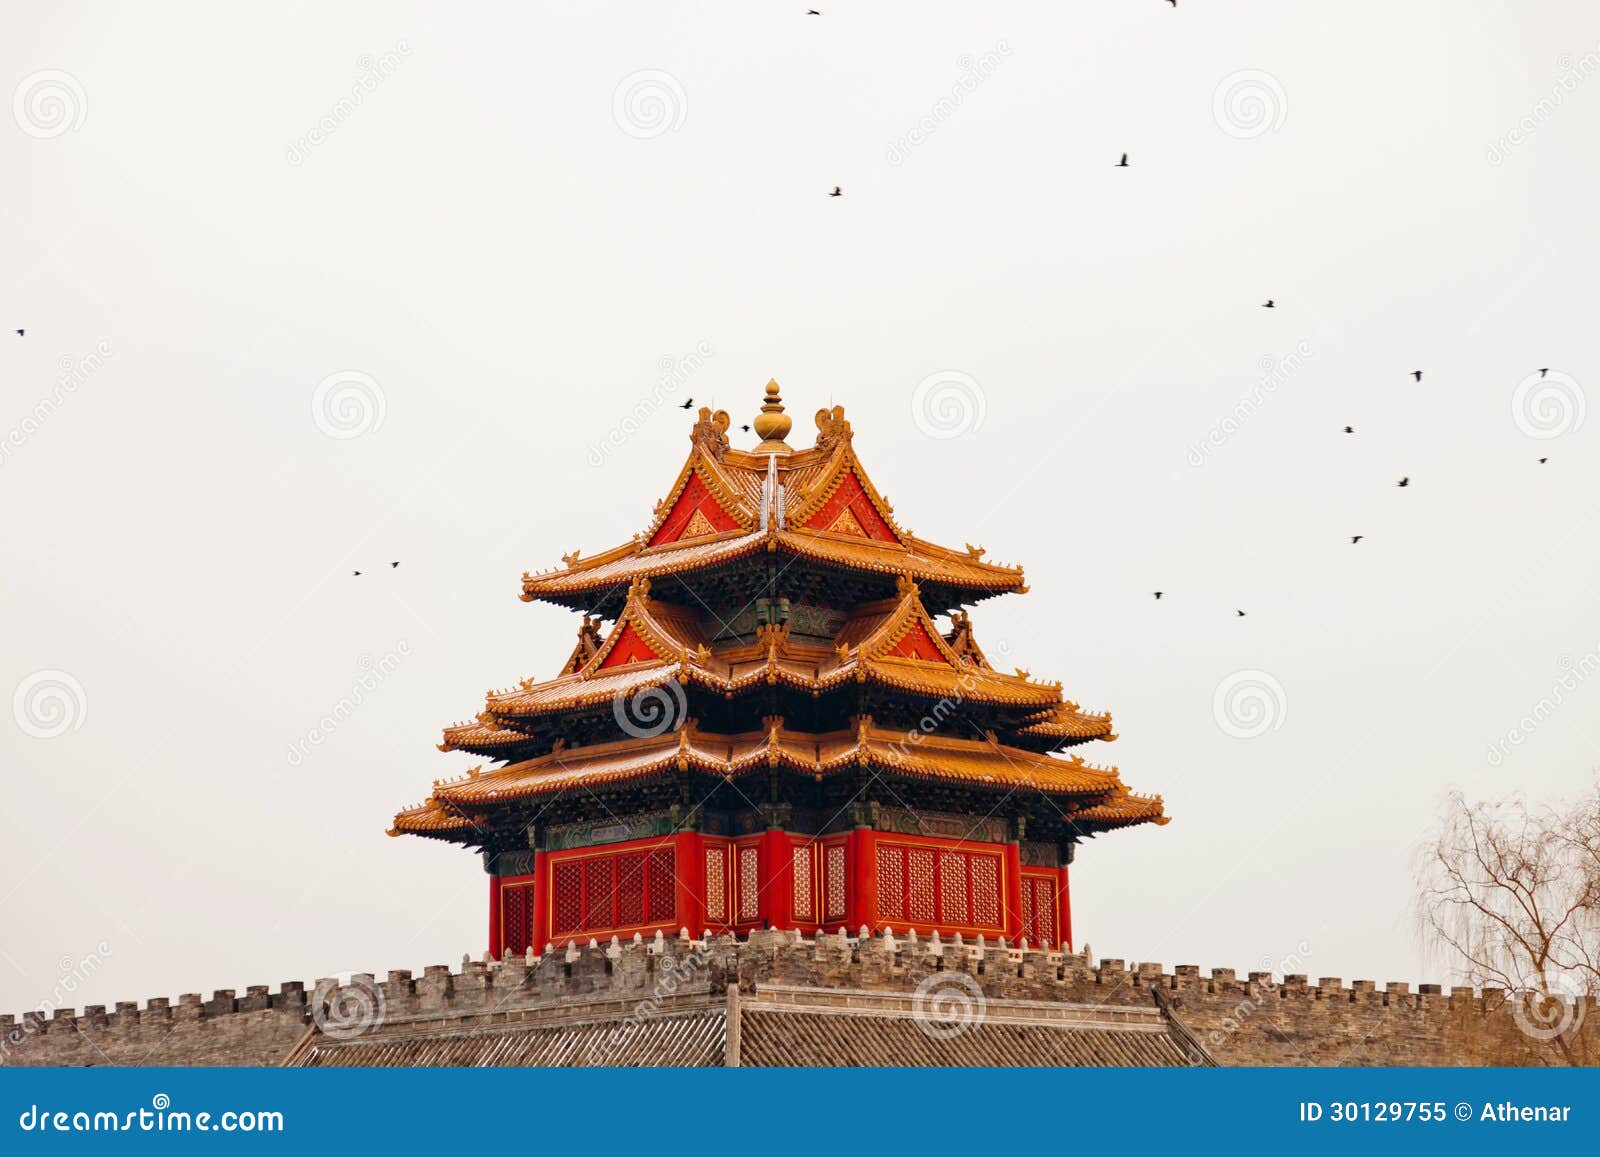 the turret of the forbidden city